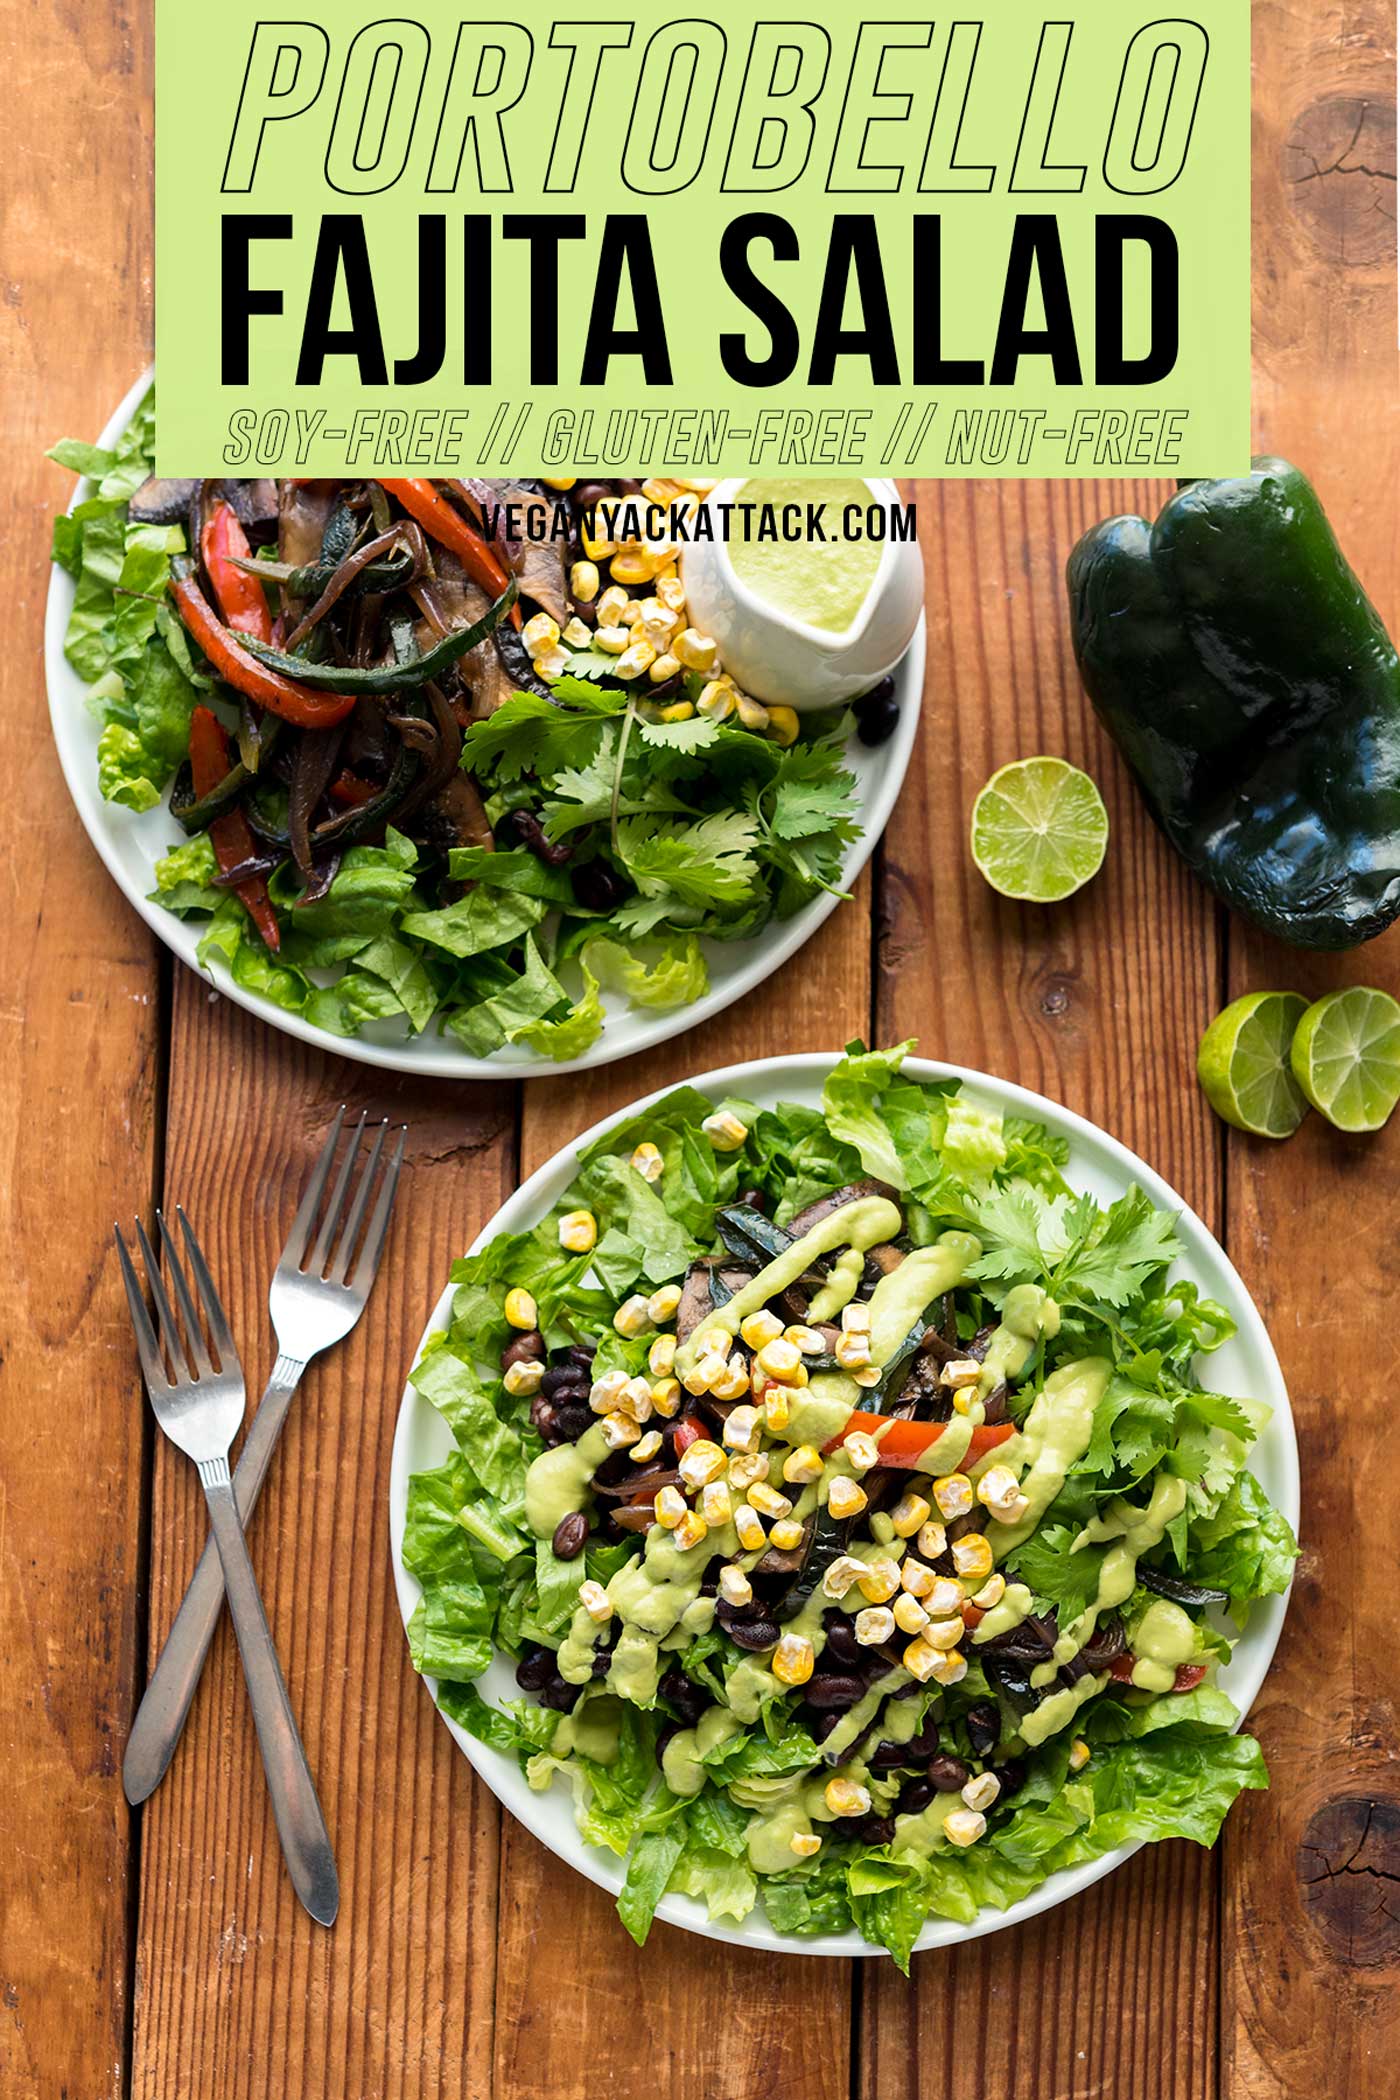 Need dinner in a pinch? This Portobello Fajita Salad from Vegan Yack Attack On the Go! is packed with flavor and comes together in under 30 minutes. You'll want the creamy avocado dressing on everything! Soy-free, Gluten-free, & Nut-free, to boot!